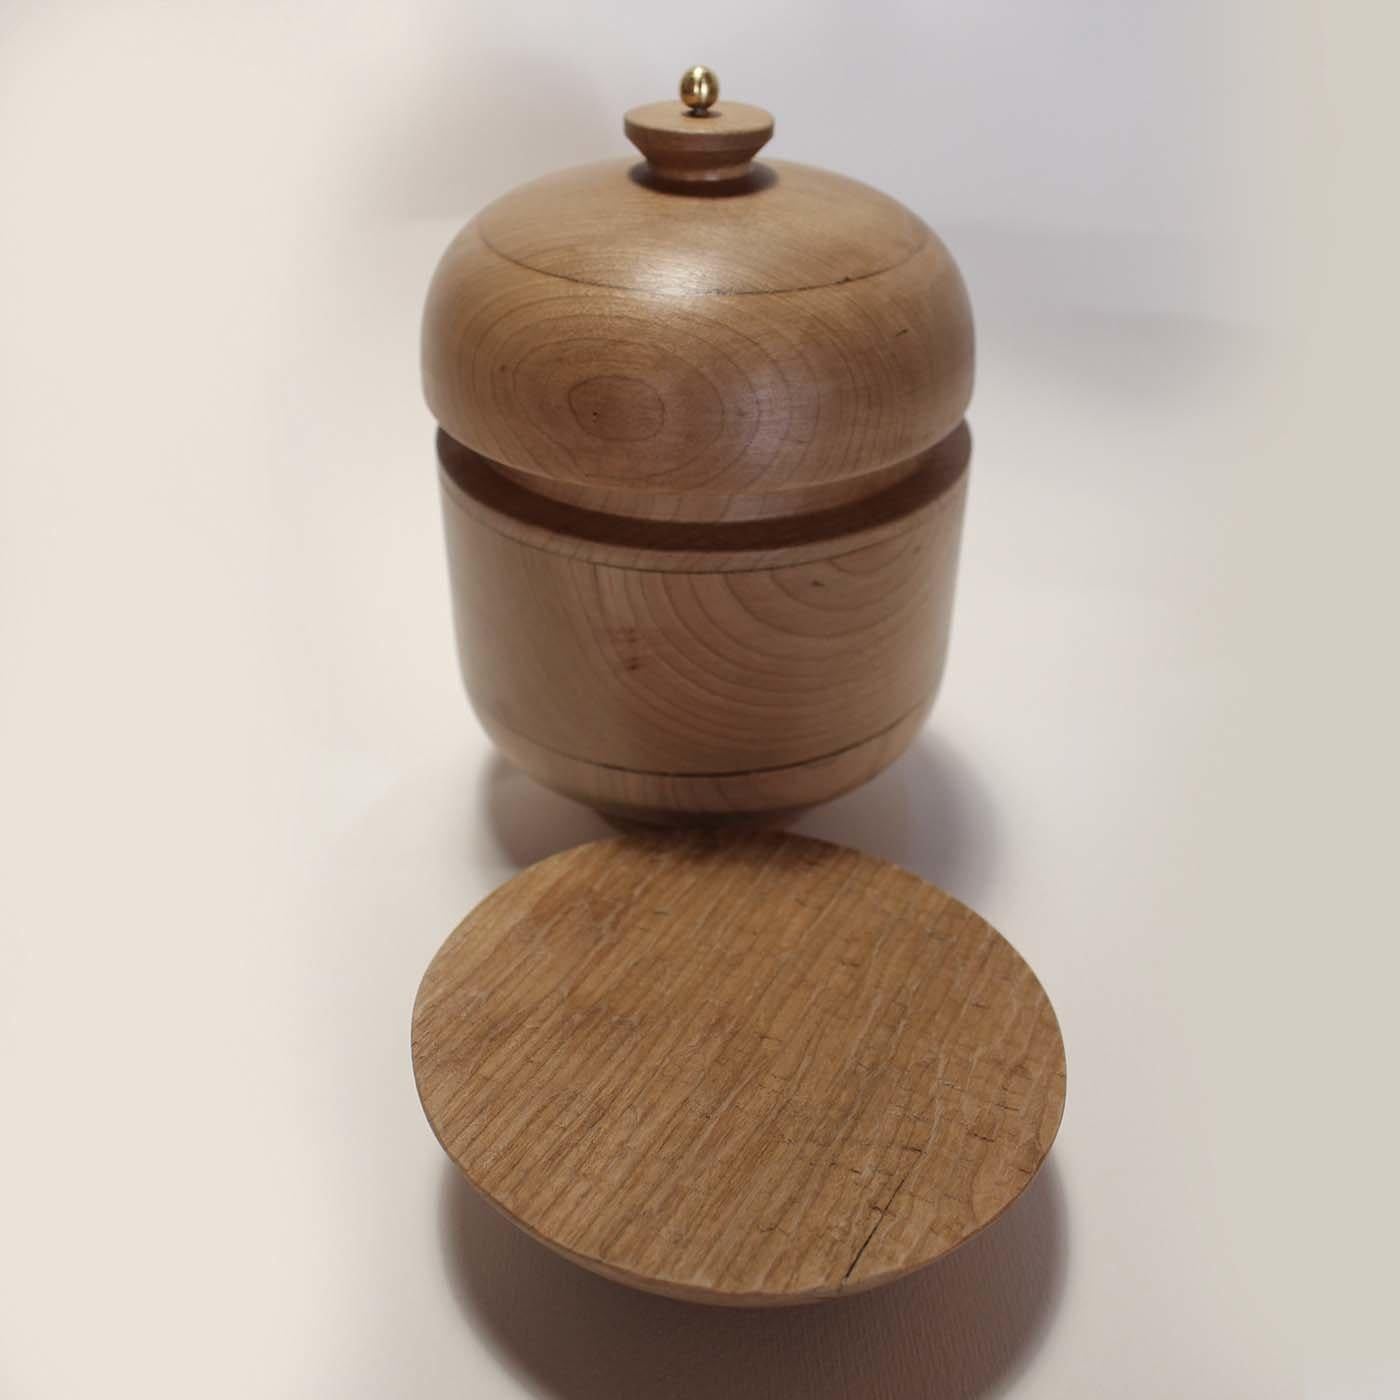 Handcrafted of lathe-turned cherry and finished with a protective water-based, non-toxic finish, this stunning object of decor is composed of three pieces that can be displayed in different combinations. The main piece is shaped like a footed urn